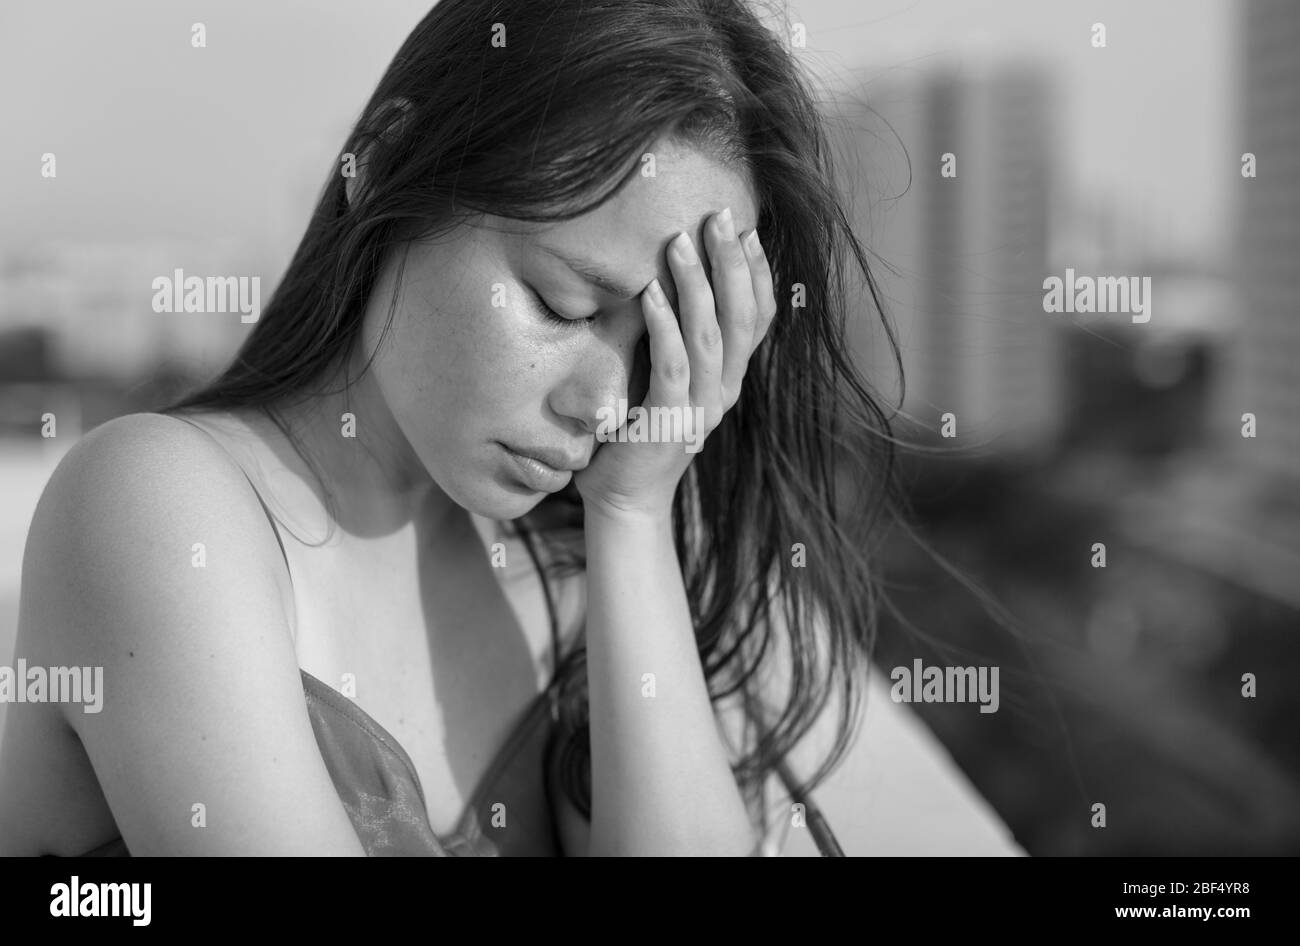 A woman standing on her balcony window depressed and unhappy. black and white. Stock Photo